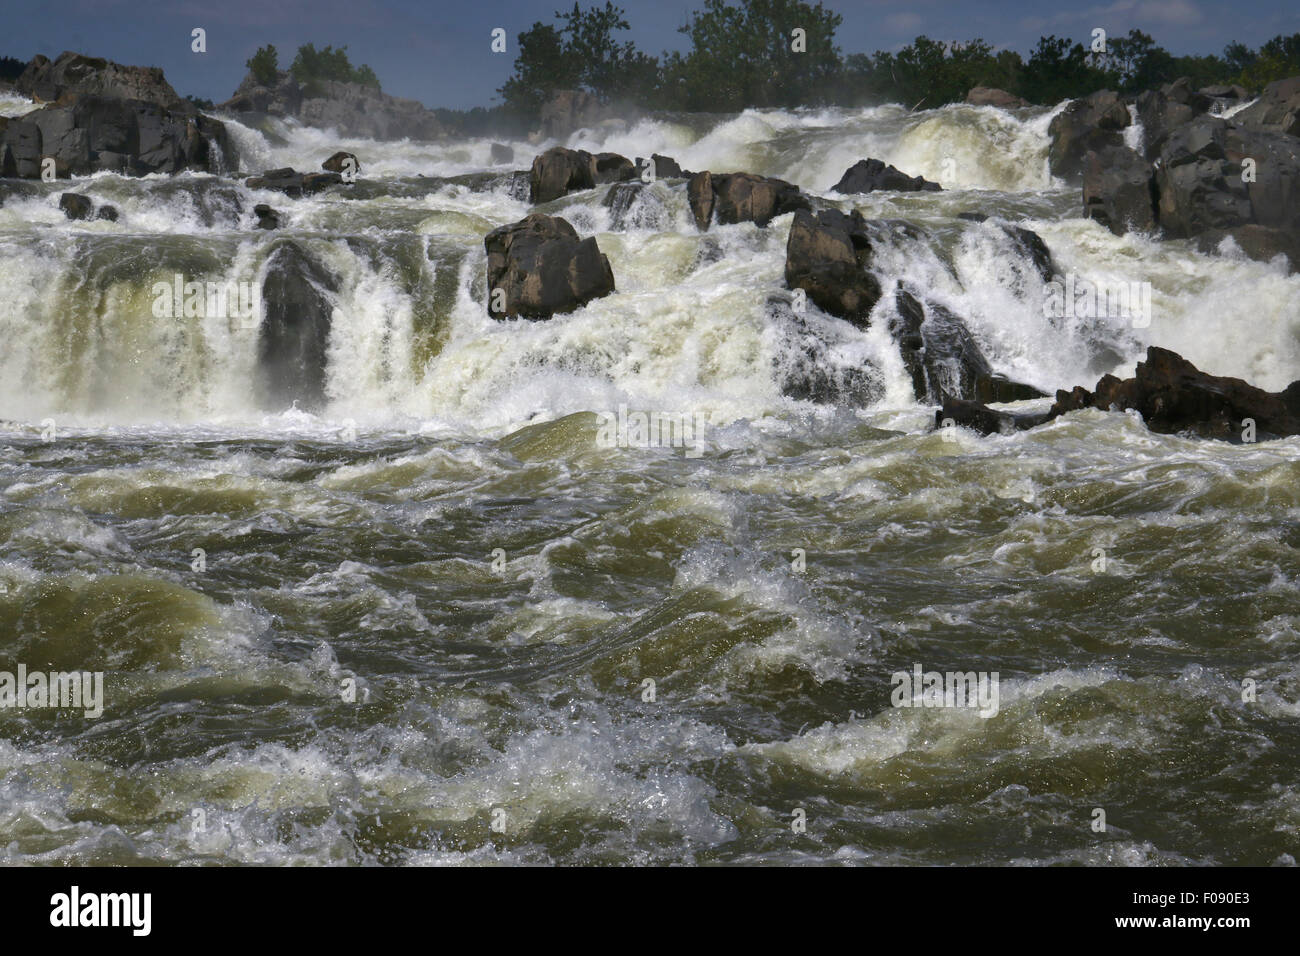 Great Falls of the Potomac River Maryland. Stock Photo